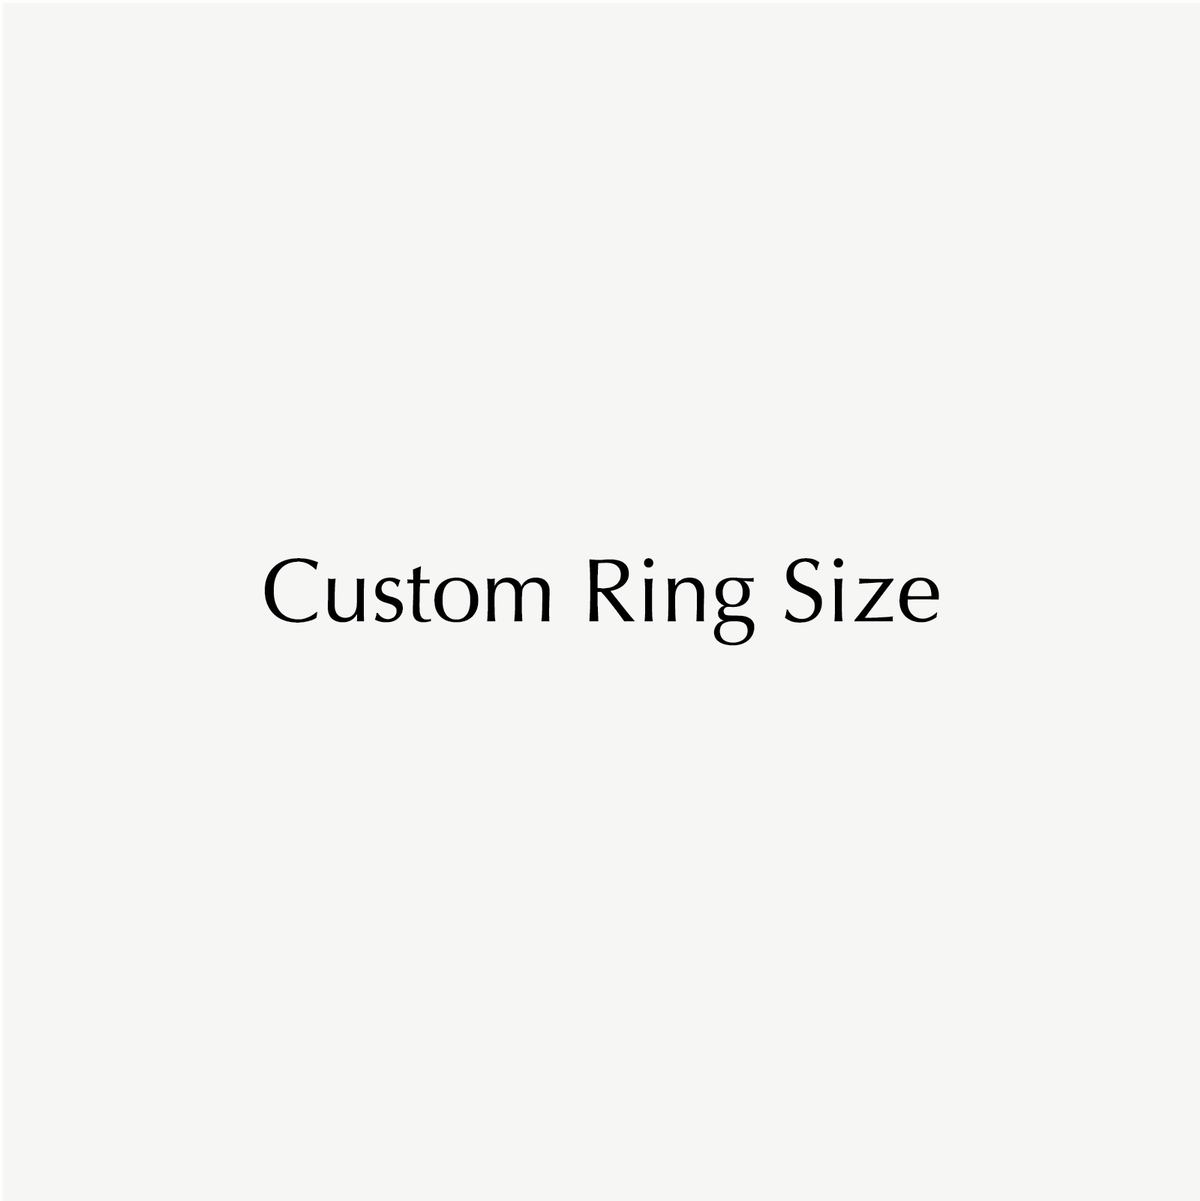 Select a half size if you require a half size from sizes F to S. For a half size and a bigger ring size, please add this product twice, with both requests.  Select your size from T to Z + 4 if you required a bigger size than listed on our site. Fine rings are those under 3mm. Wide are those rings over 3mm. If you are unsure please confirm with a customer service representative.